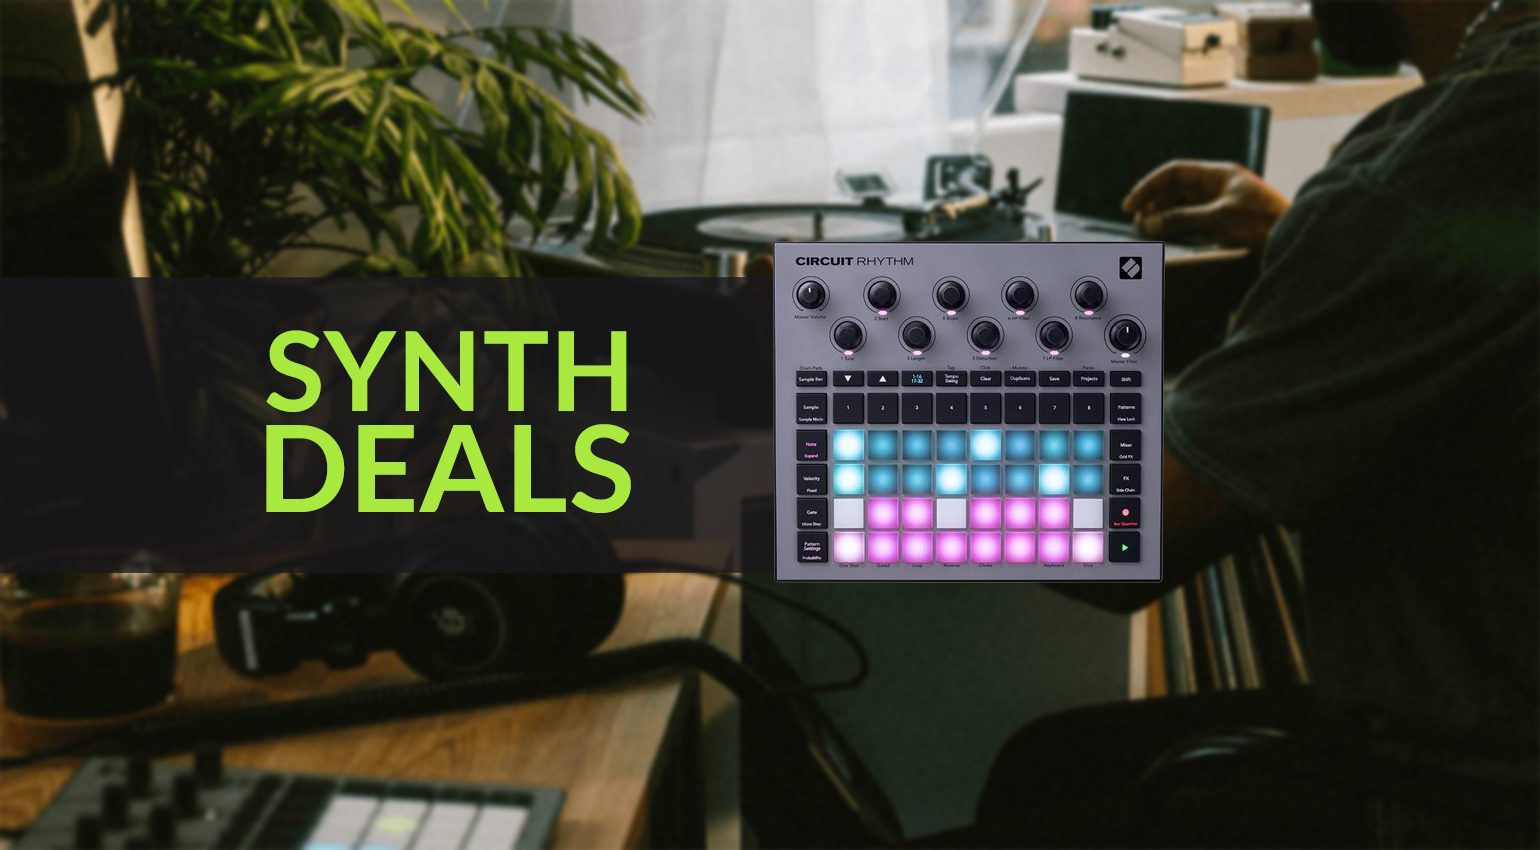 Synth Deals from Novation, KORG, Befaco, and Erica Synths